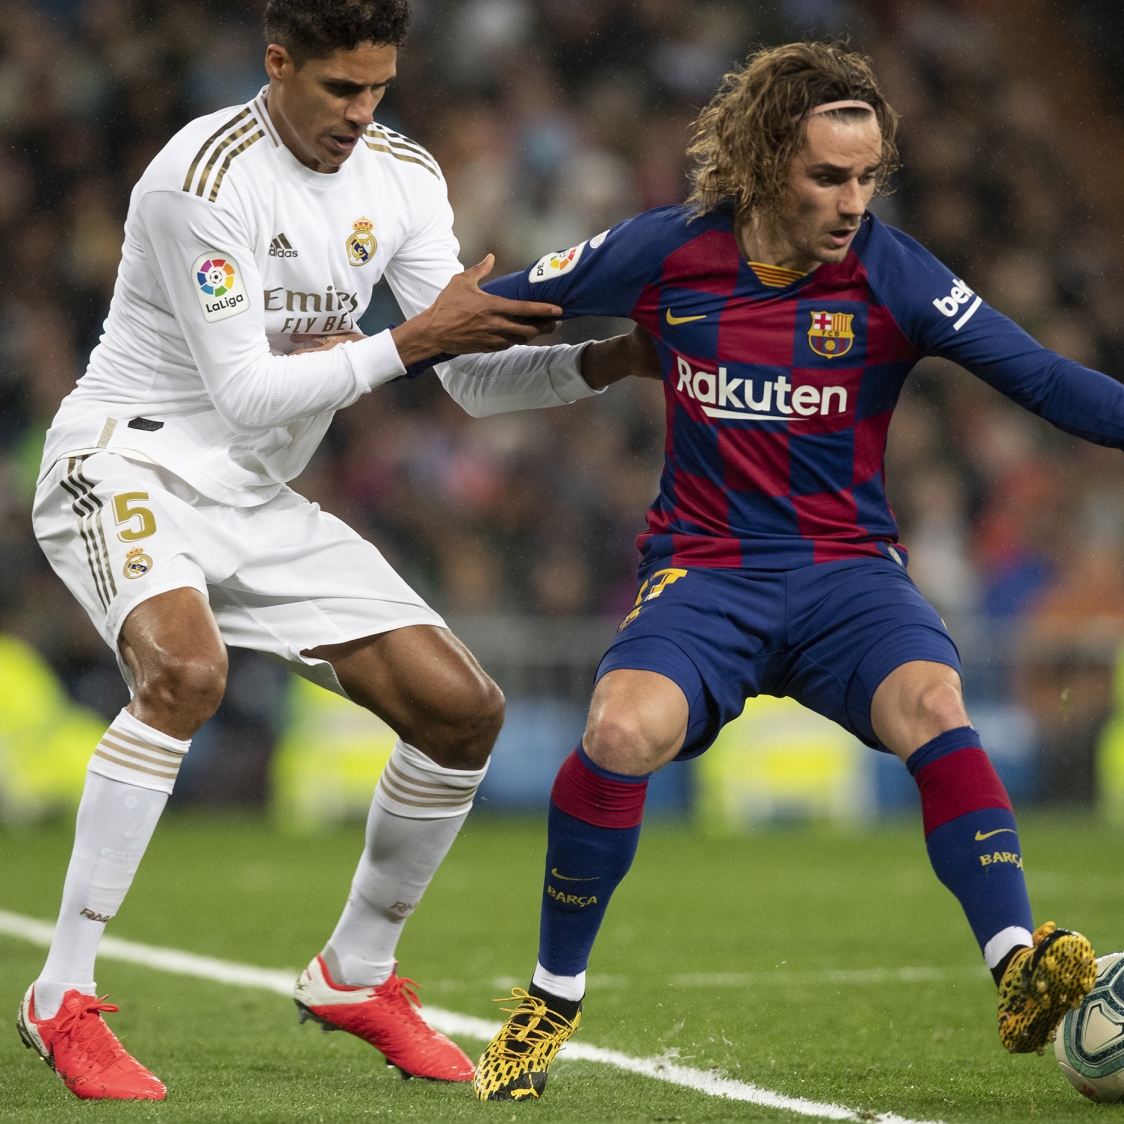 No Clear Favorite In Dramatic Elclasico Says Laliga Legends